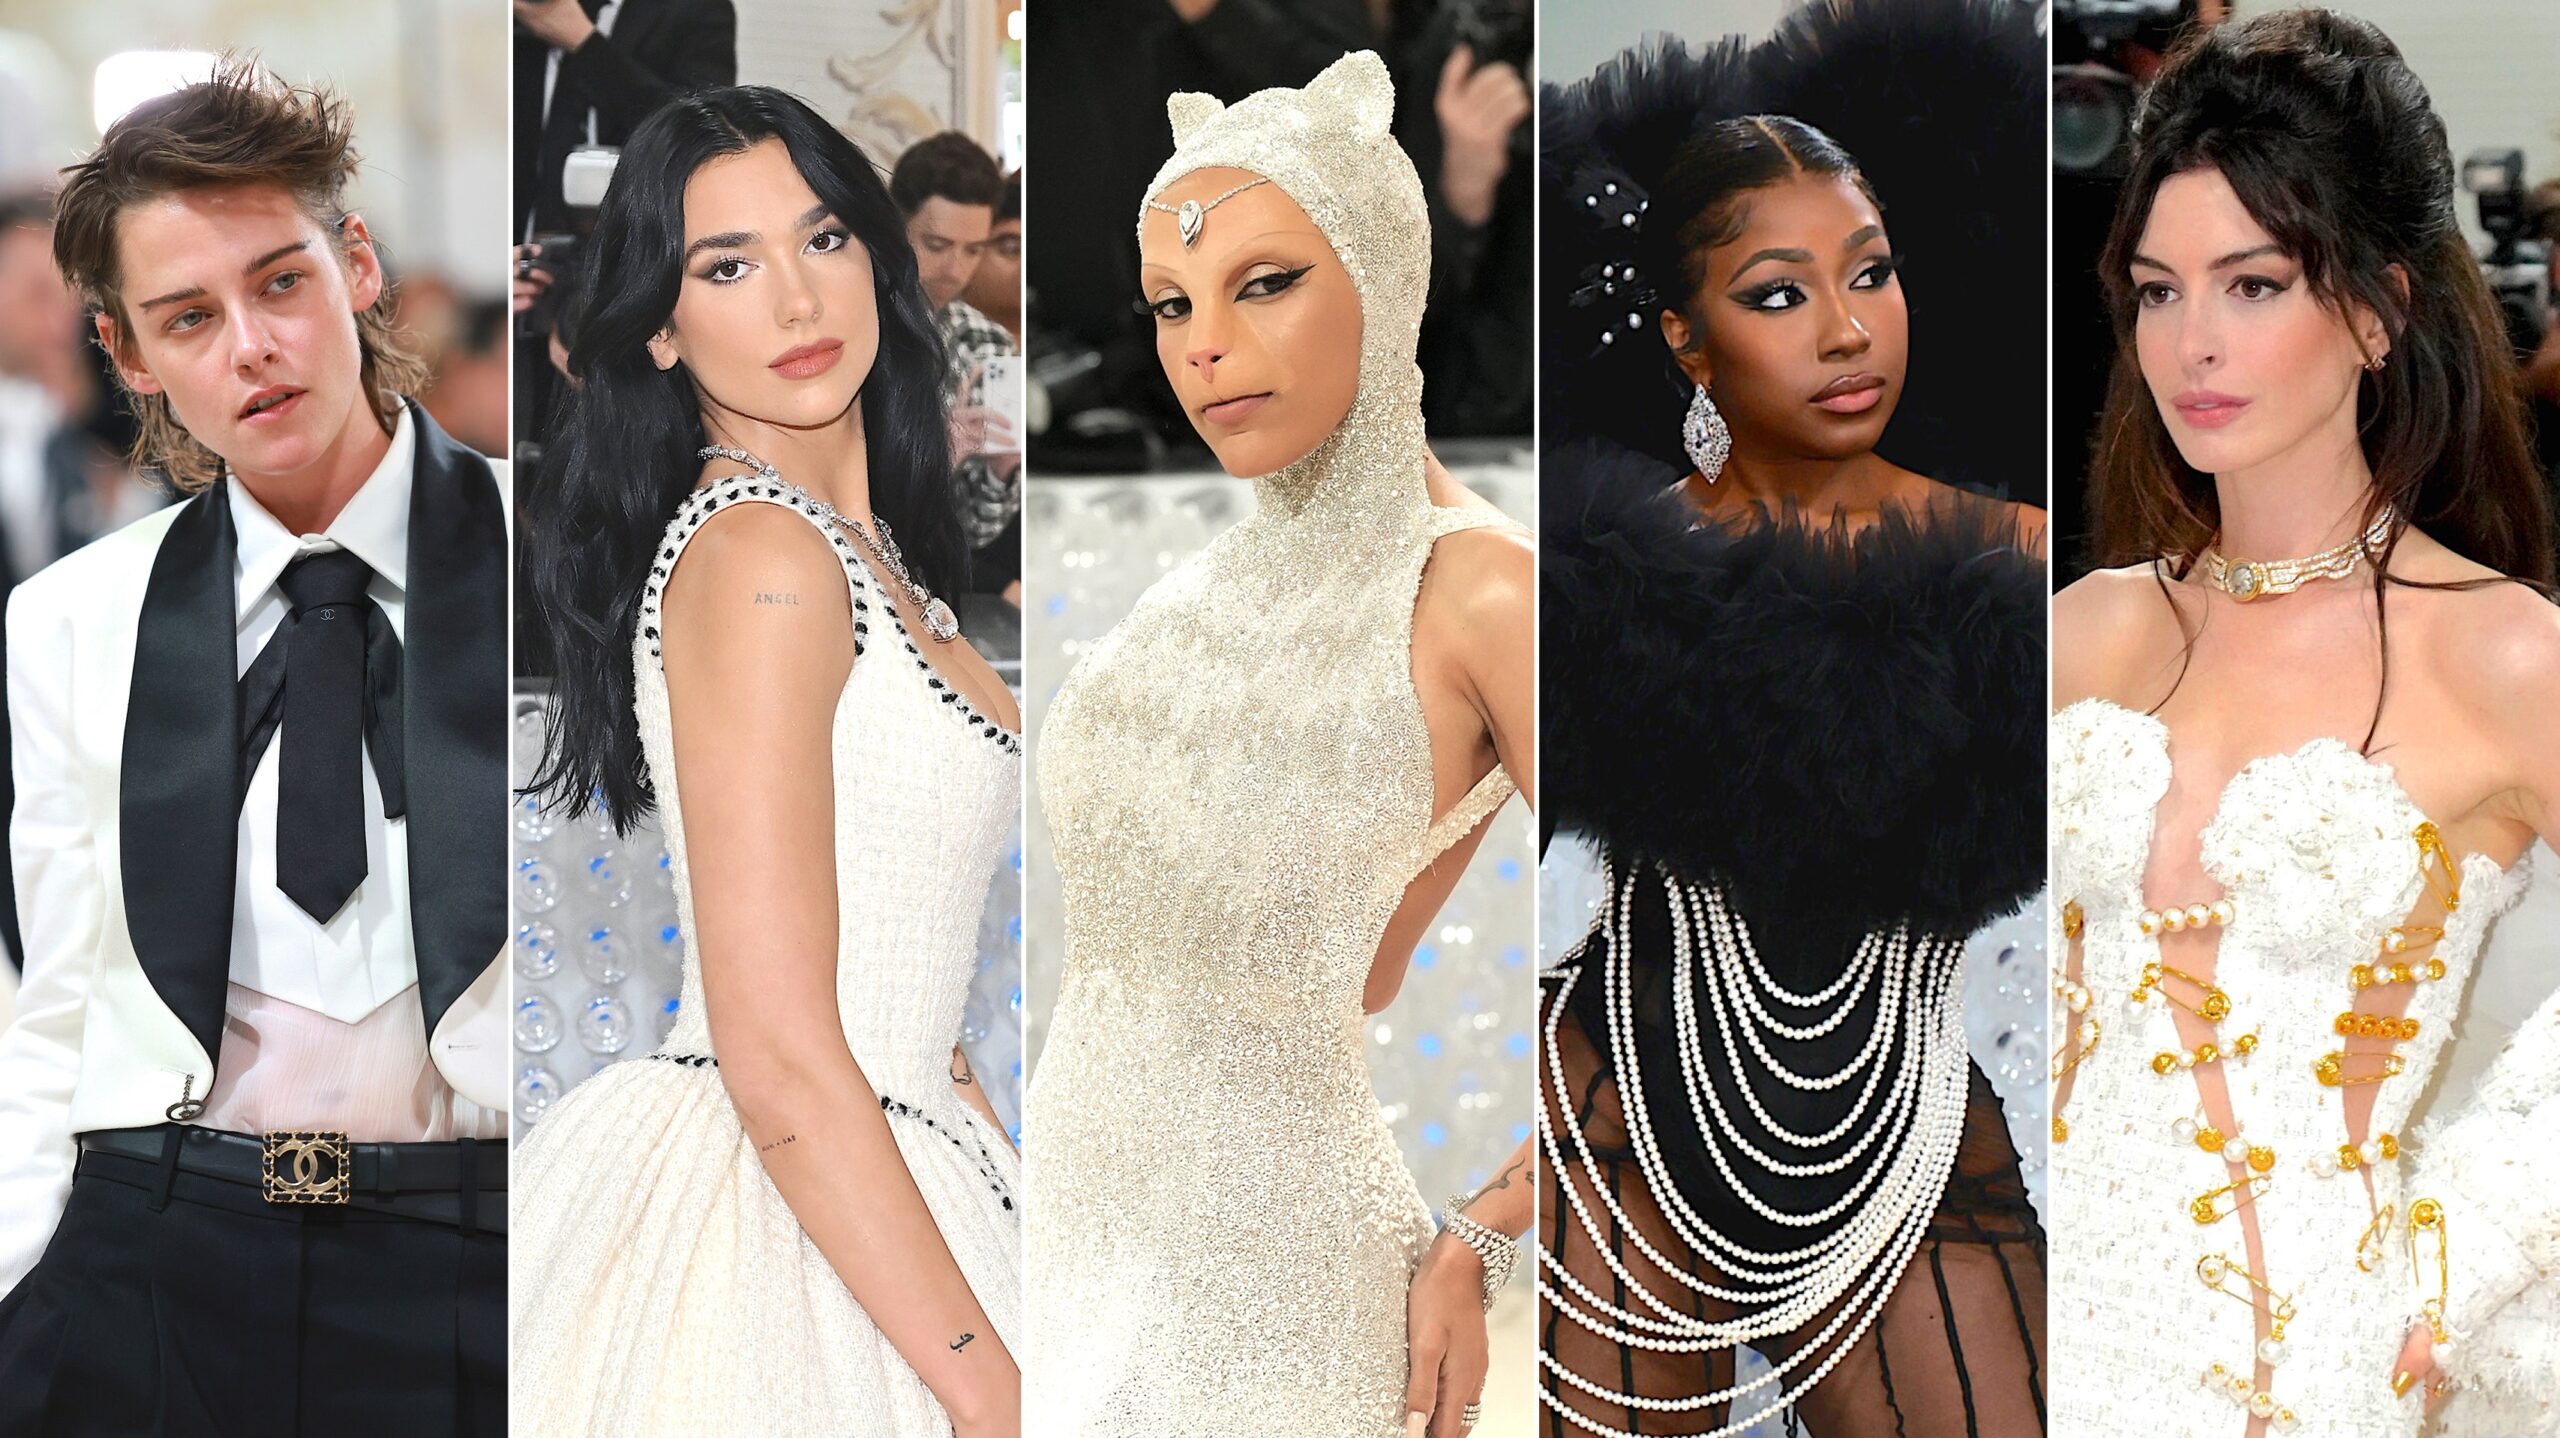 Karl Lagerfeld: Celebs who have worn his iconic designs at the Met Gala